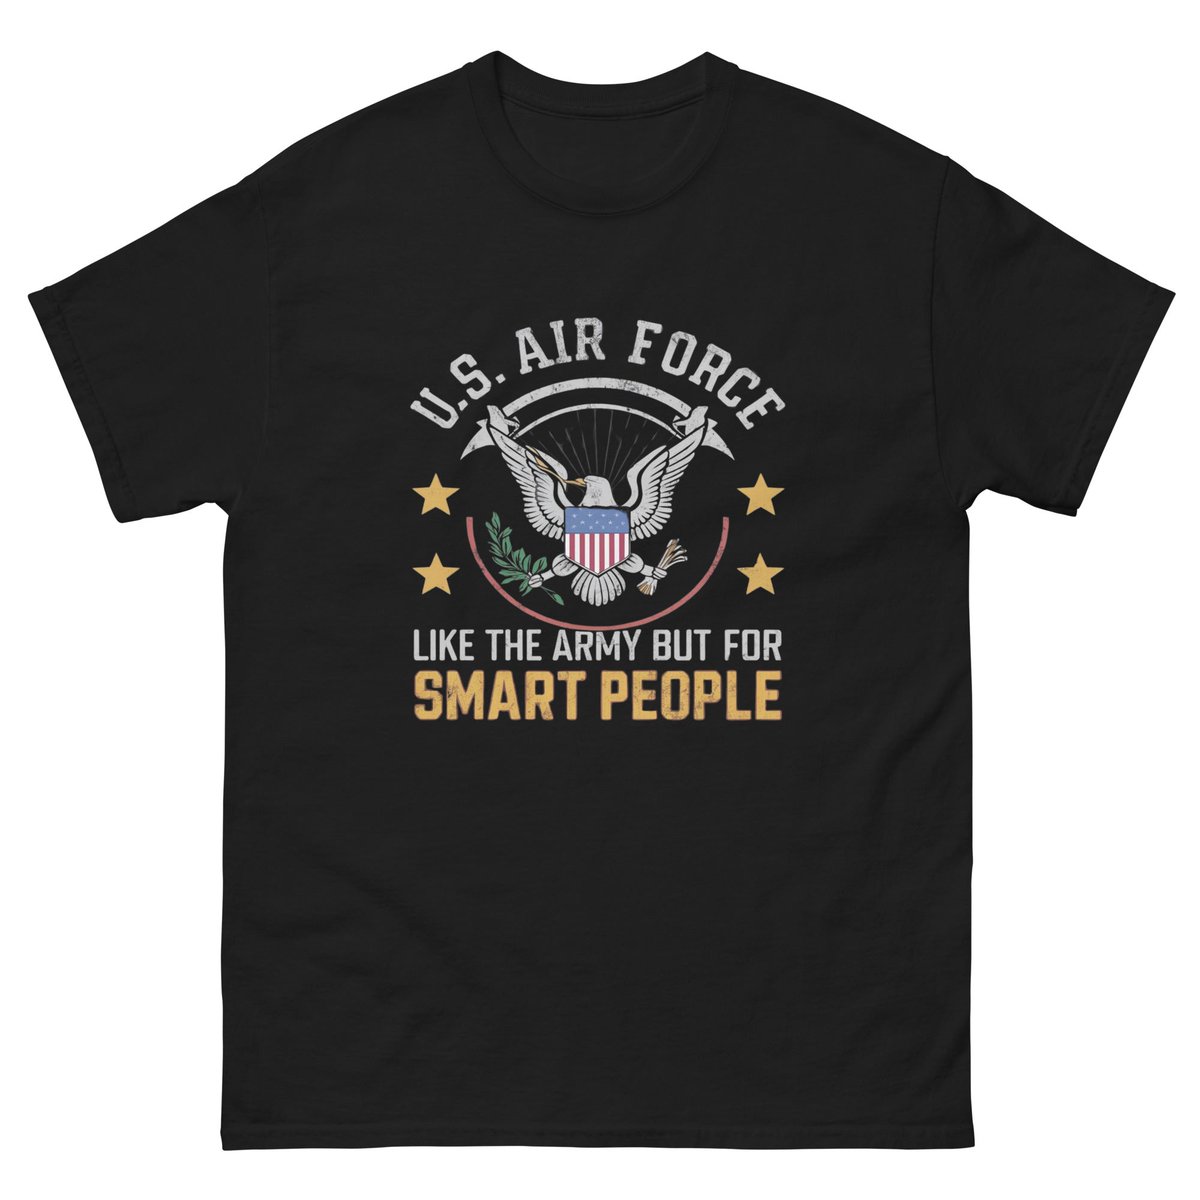 US AIR FORCE simpleeapparelstore.com/products/air-f… #usairforce #USArmy